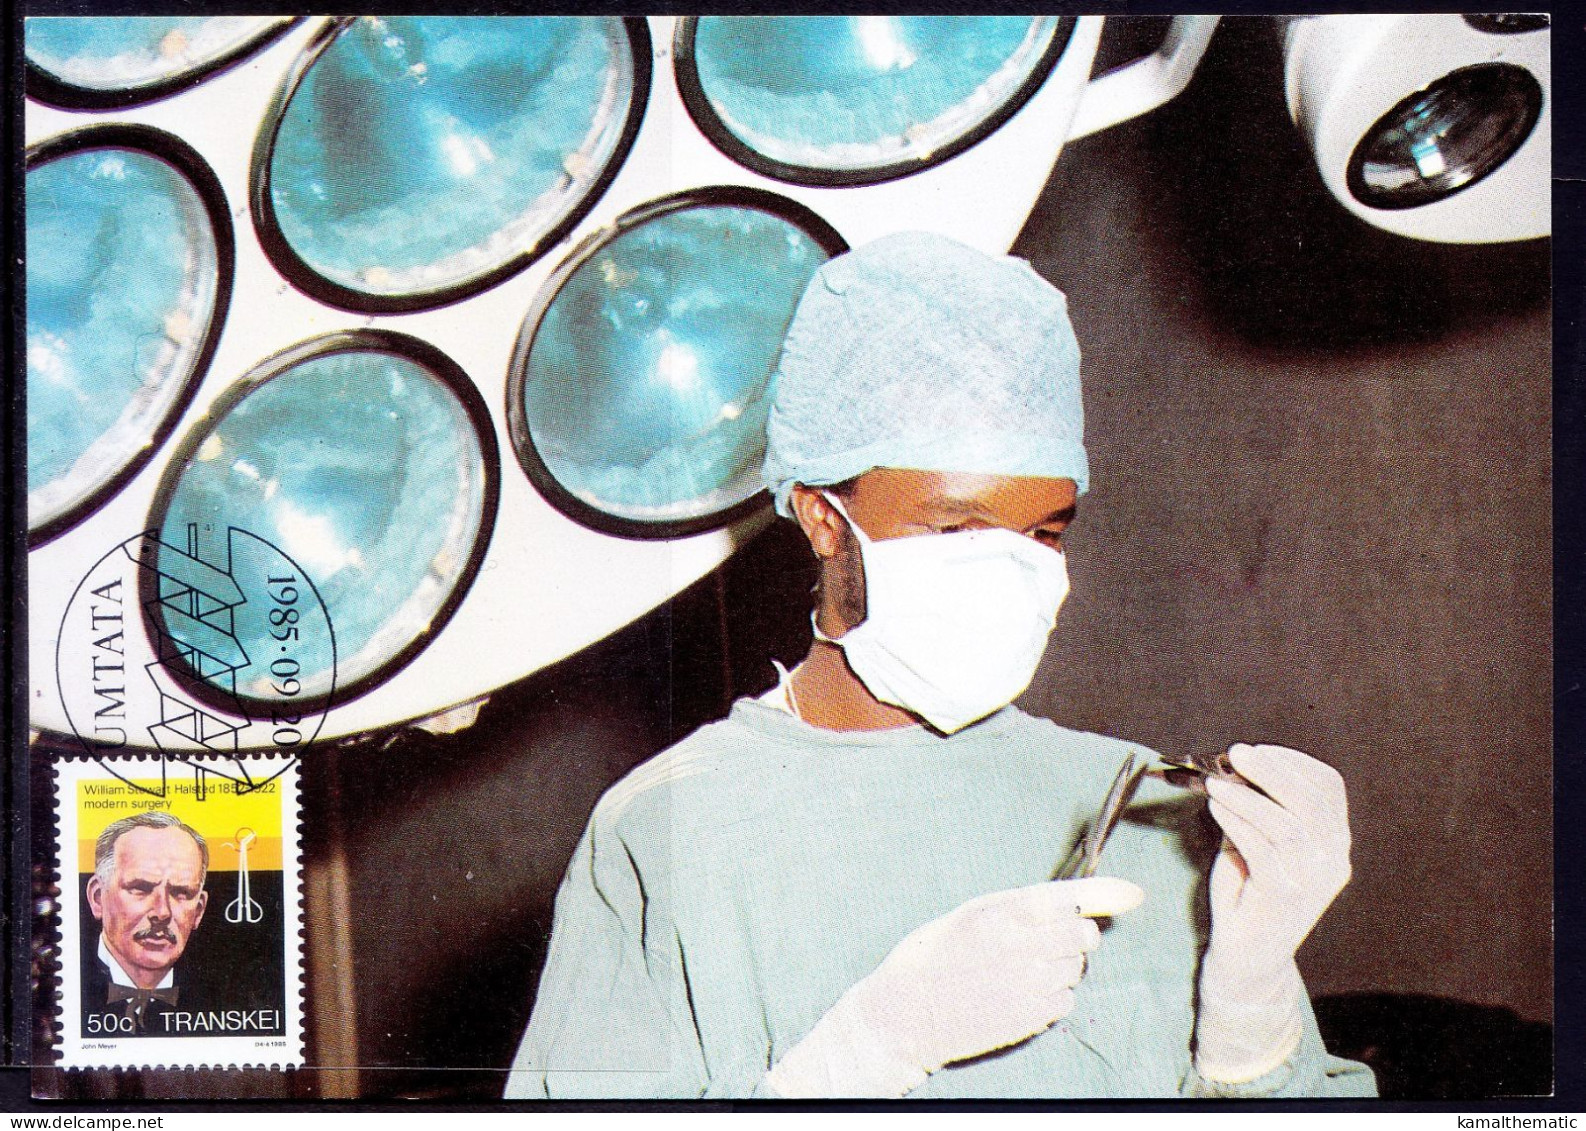 Surgeon William S Halsted, Aseptic Technique, Modern Surgery, Transkei 1985 Maxi Card - Medizin